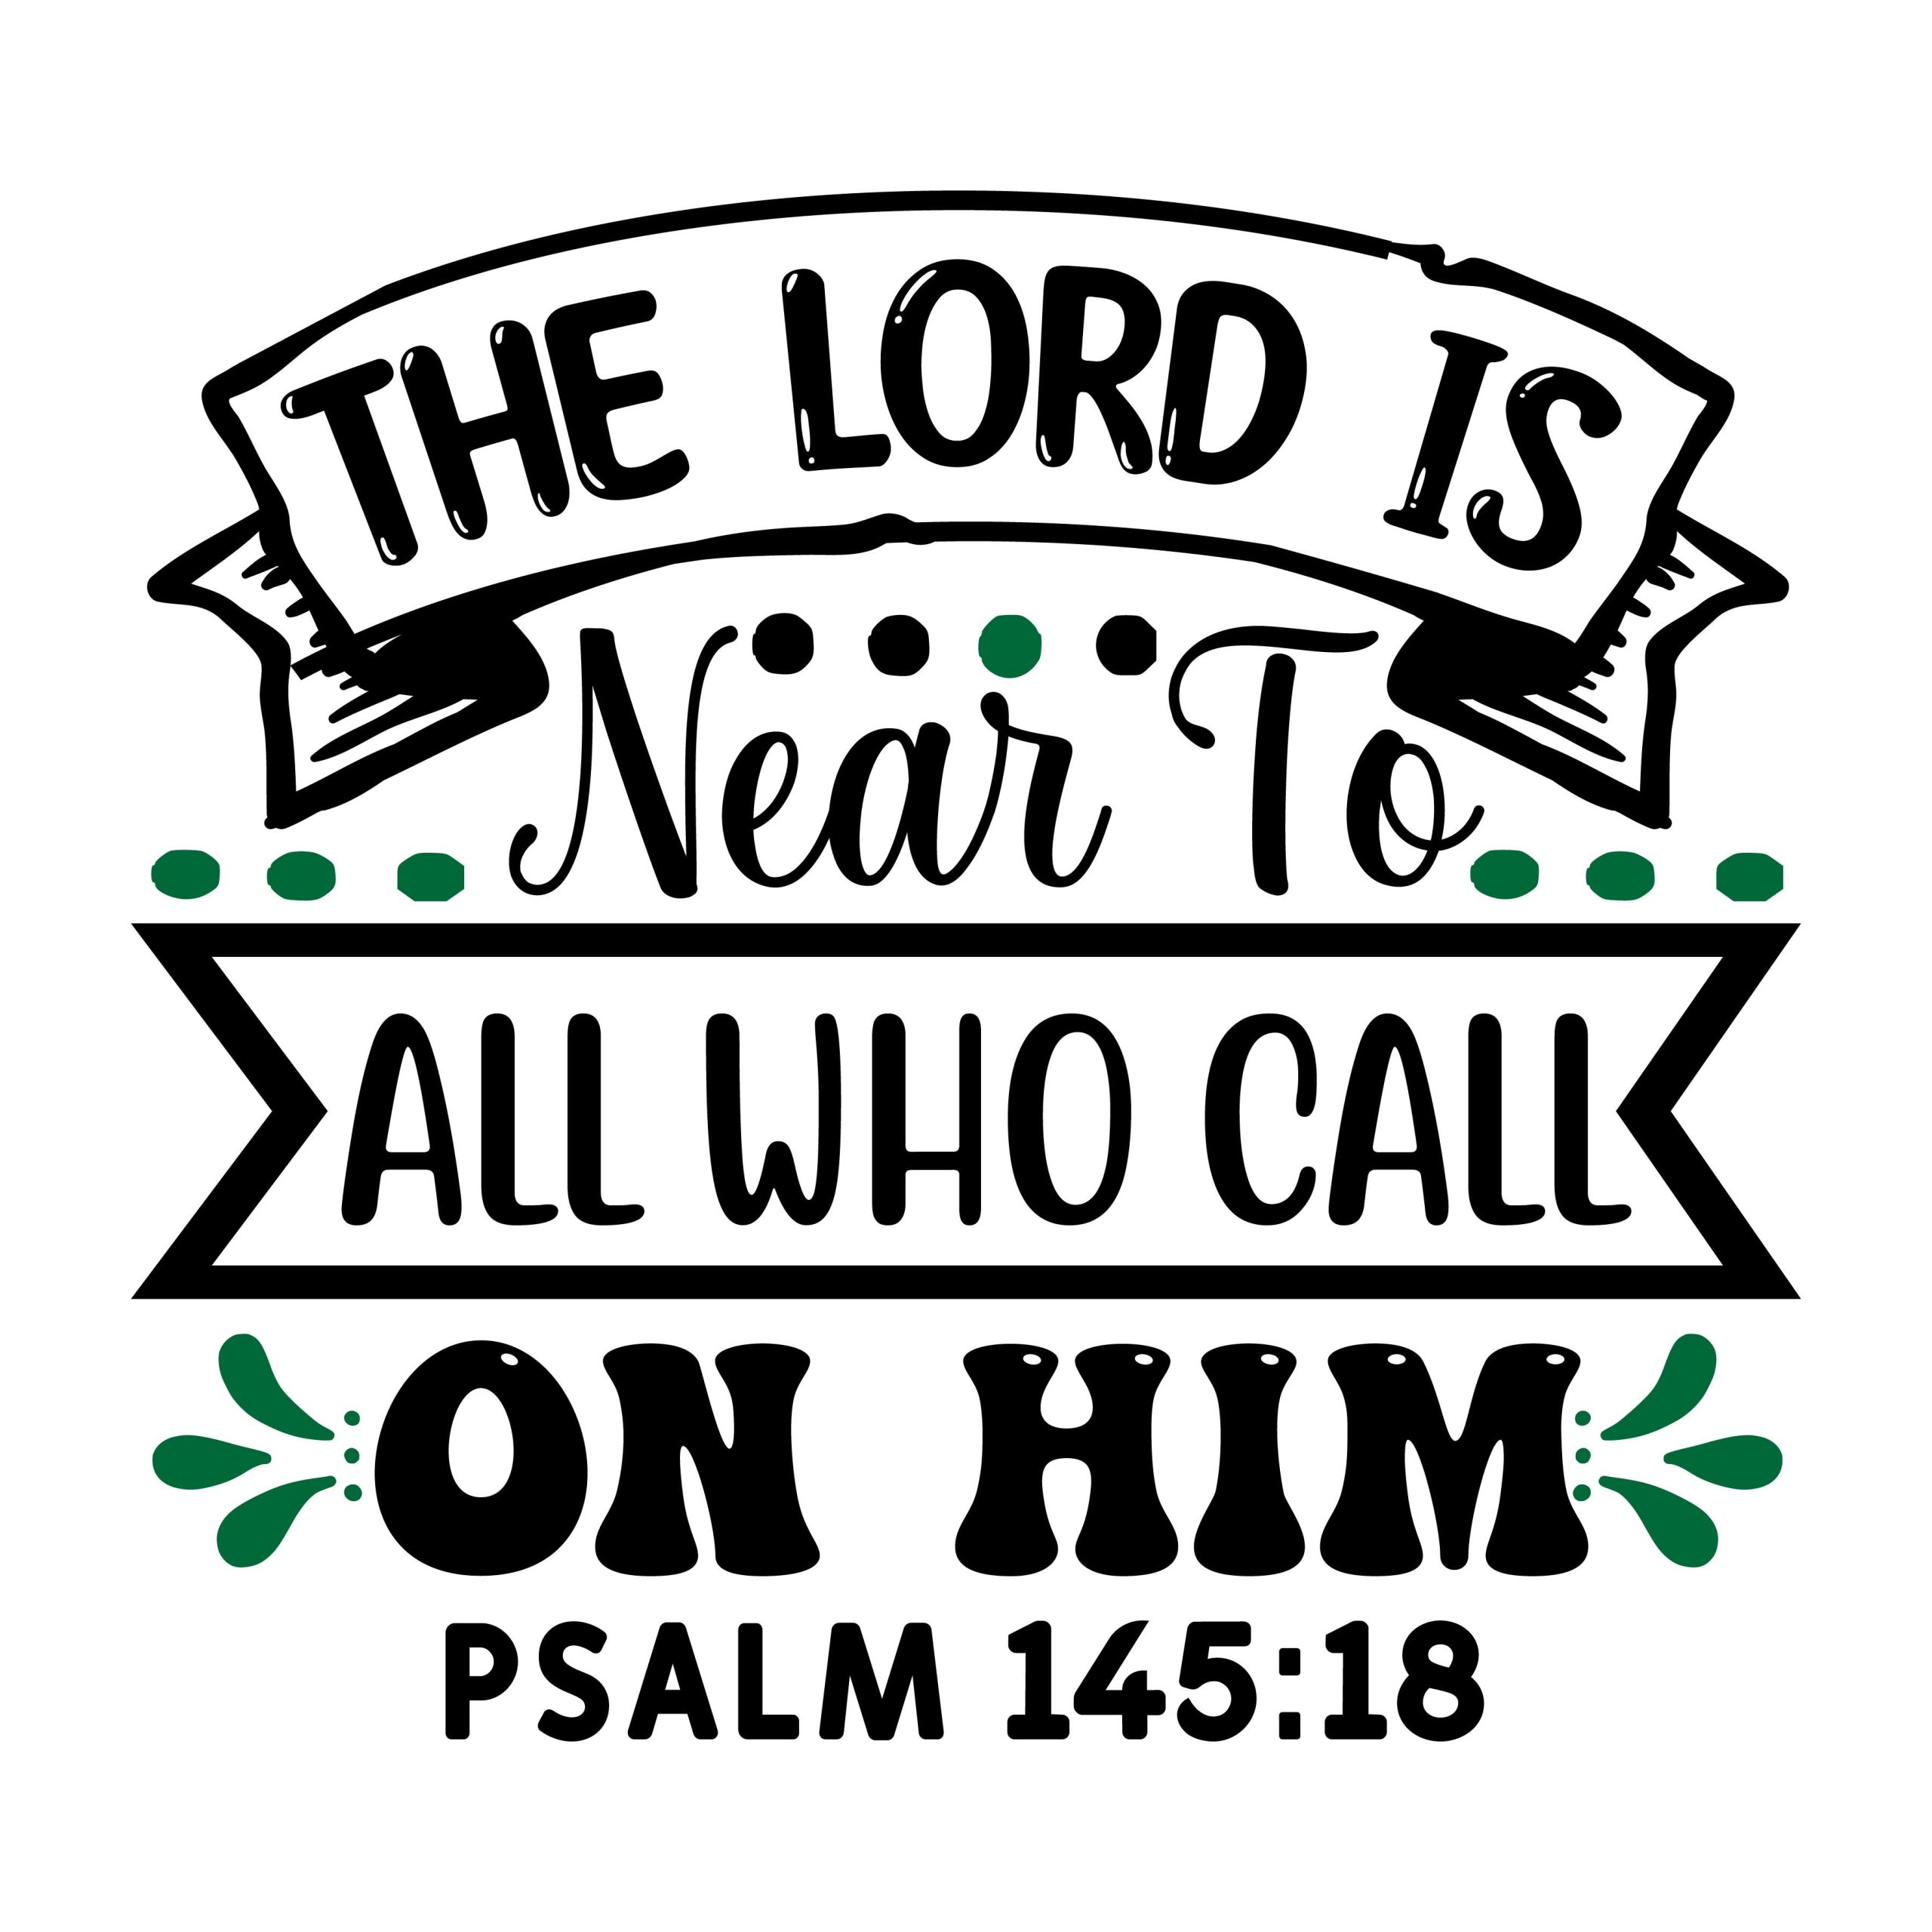 The lord is near to all who call on him psalm 145:18, bible verses, scripture verses, svg files, passages, sayings, cricut designs, silhouette, embroidery, bundle, free cut files, design space, vector